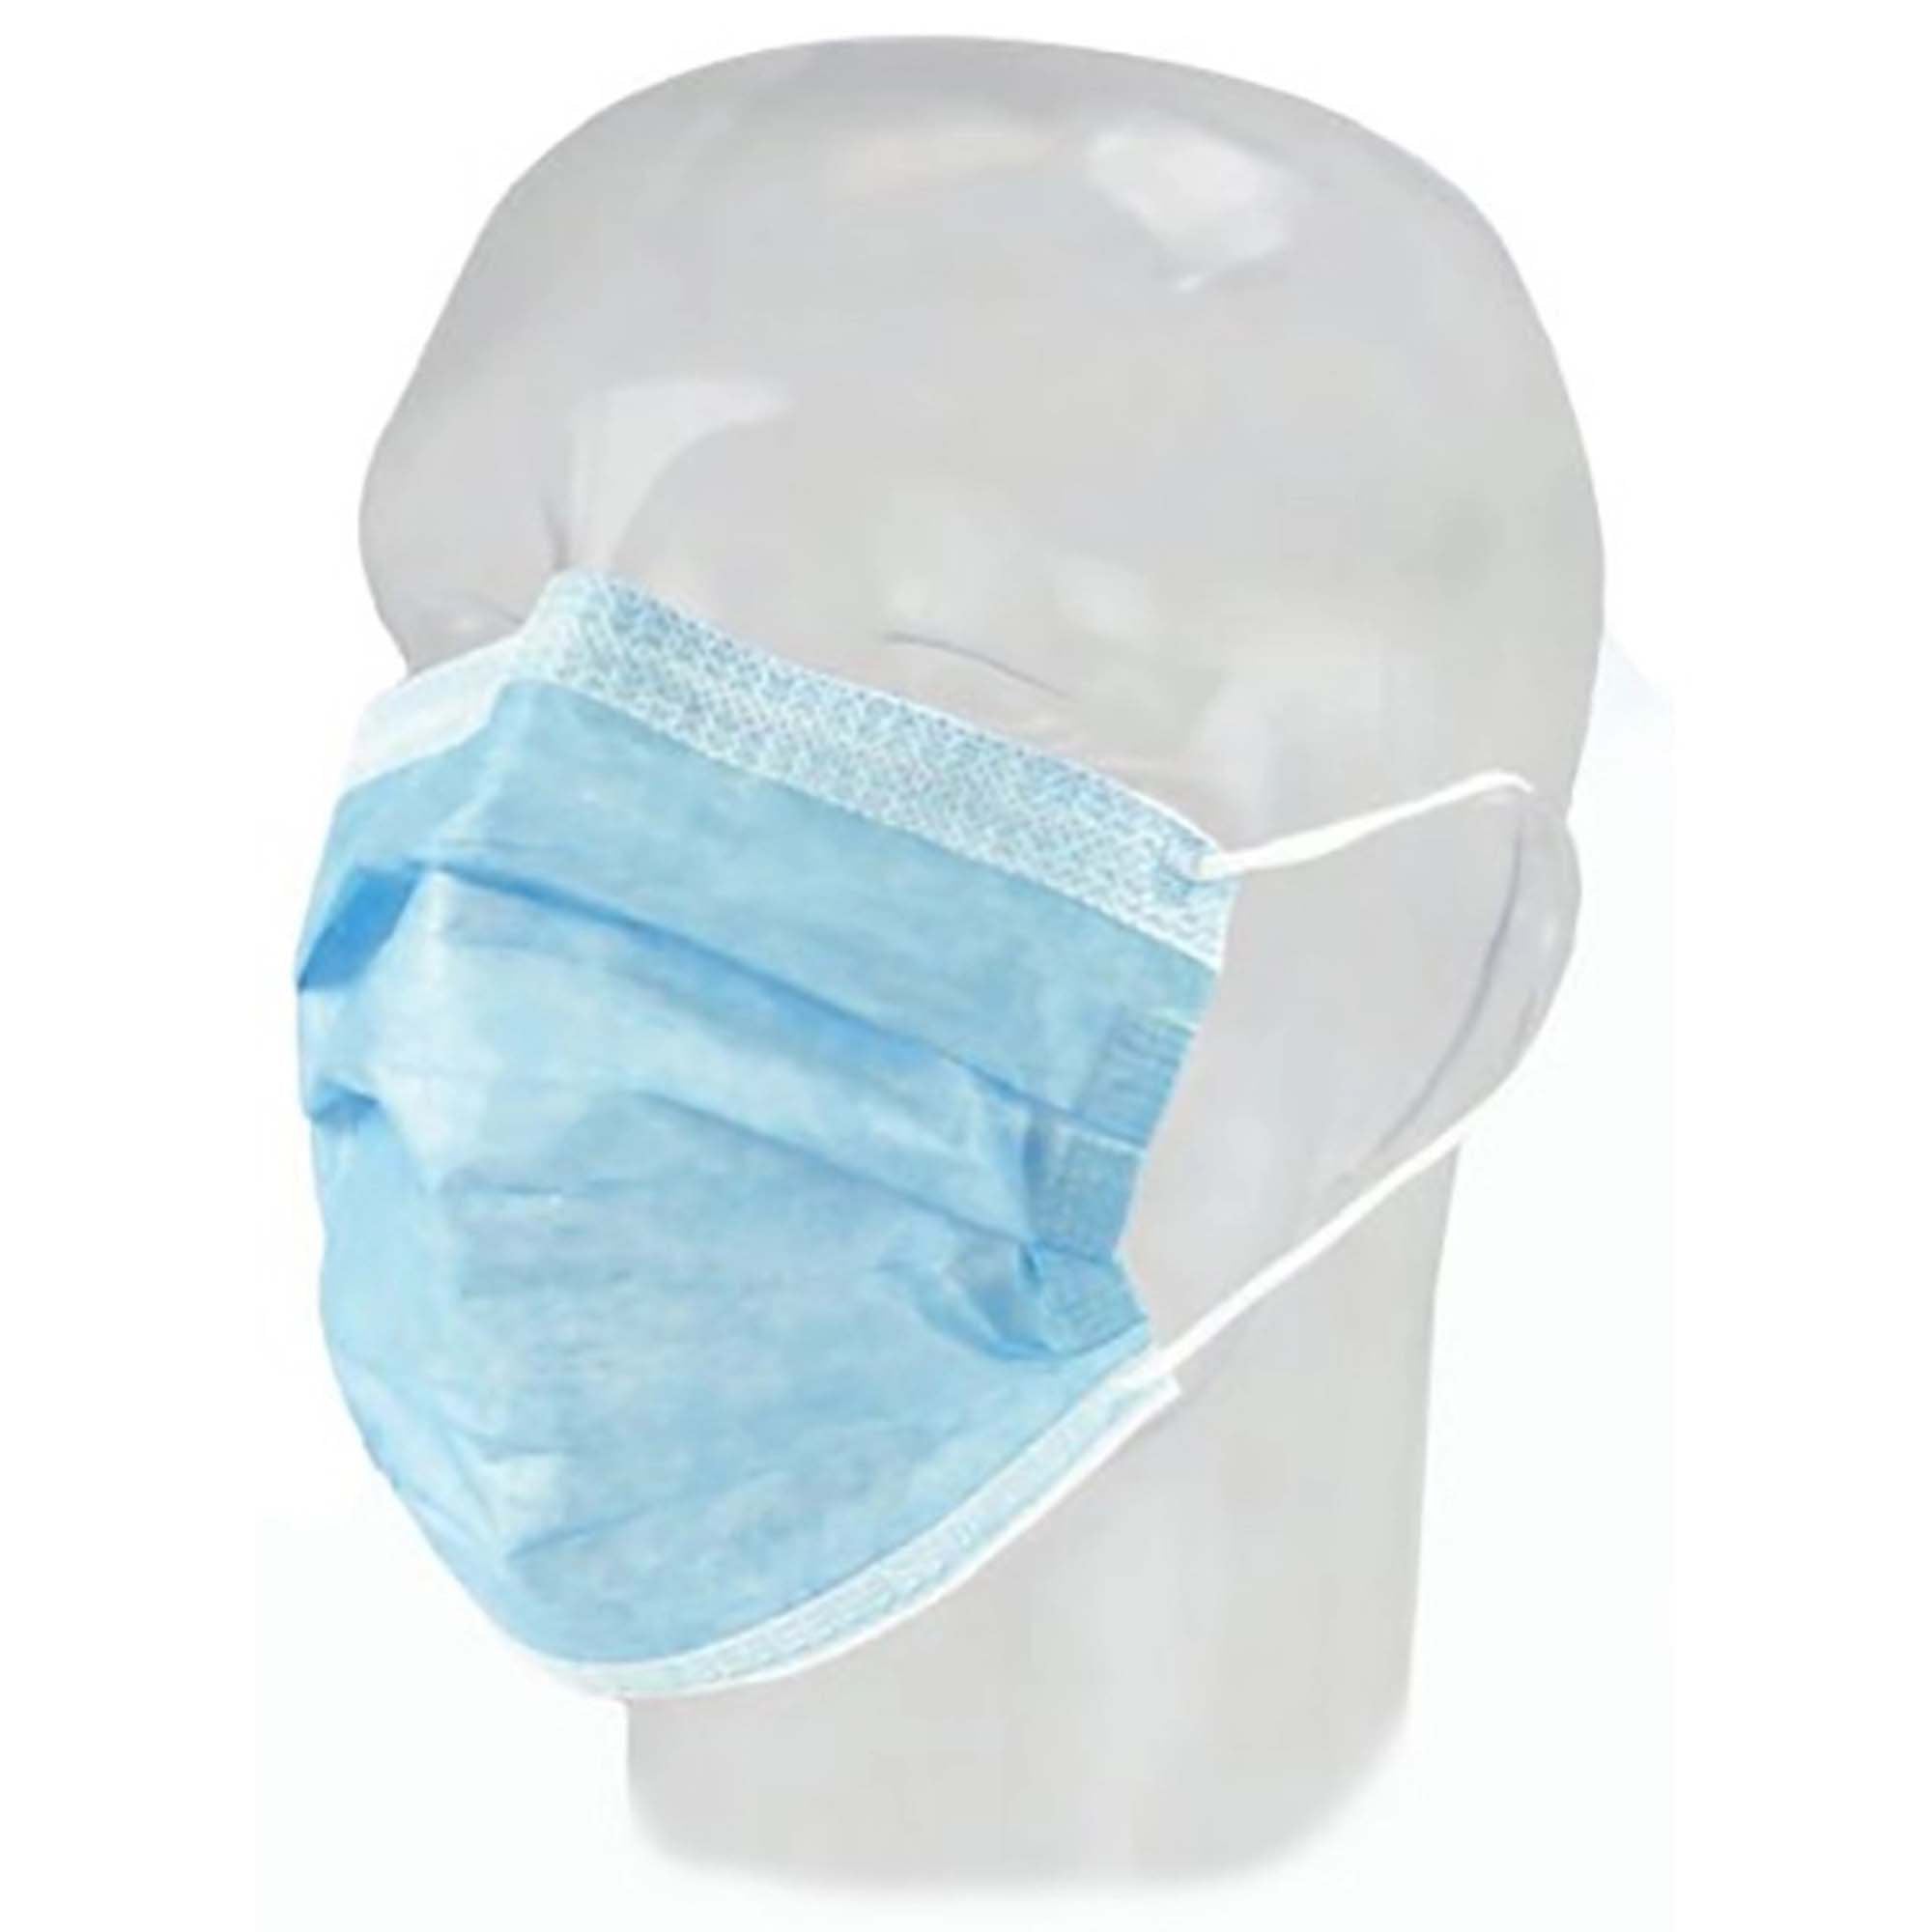 Procedure Mask FluidGard Anti-fog Foam Pleated Earloops One Size Fits Most Blue NonSterile ASTM Level 3 Adult